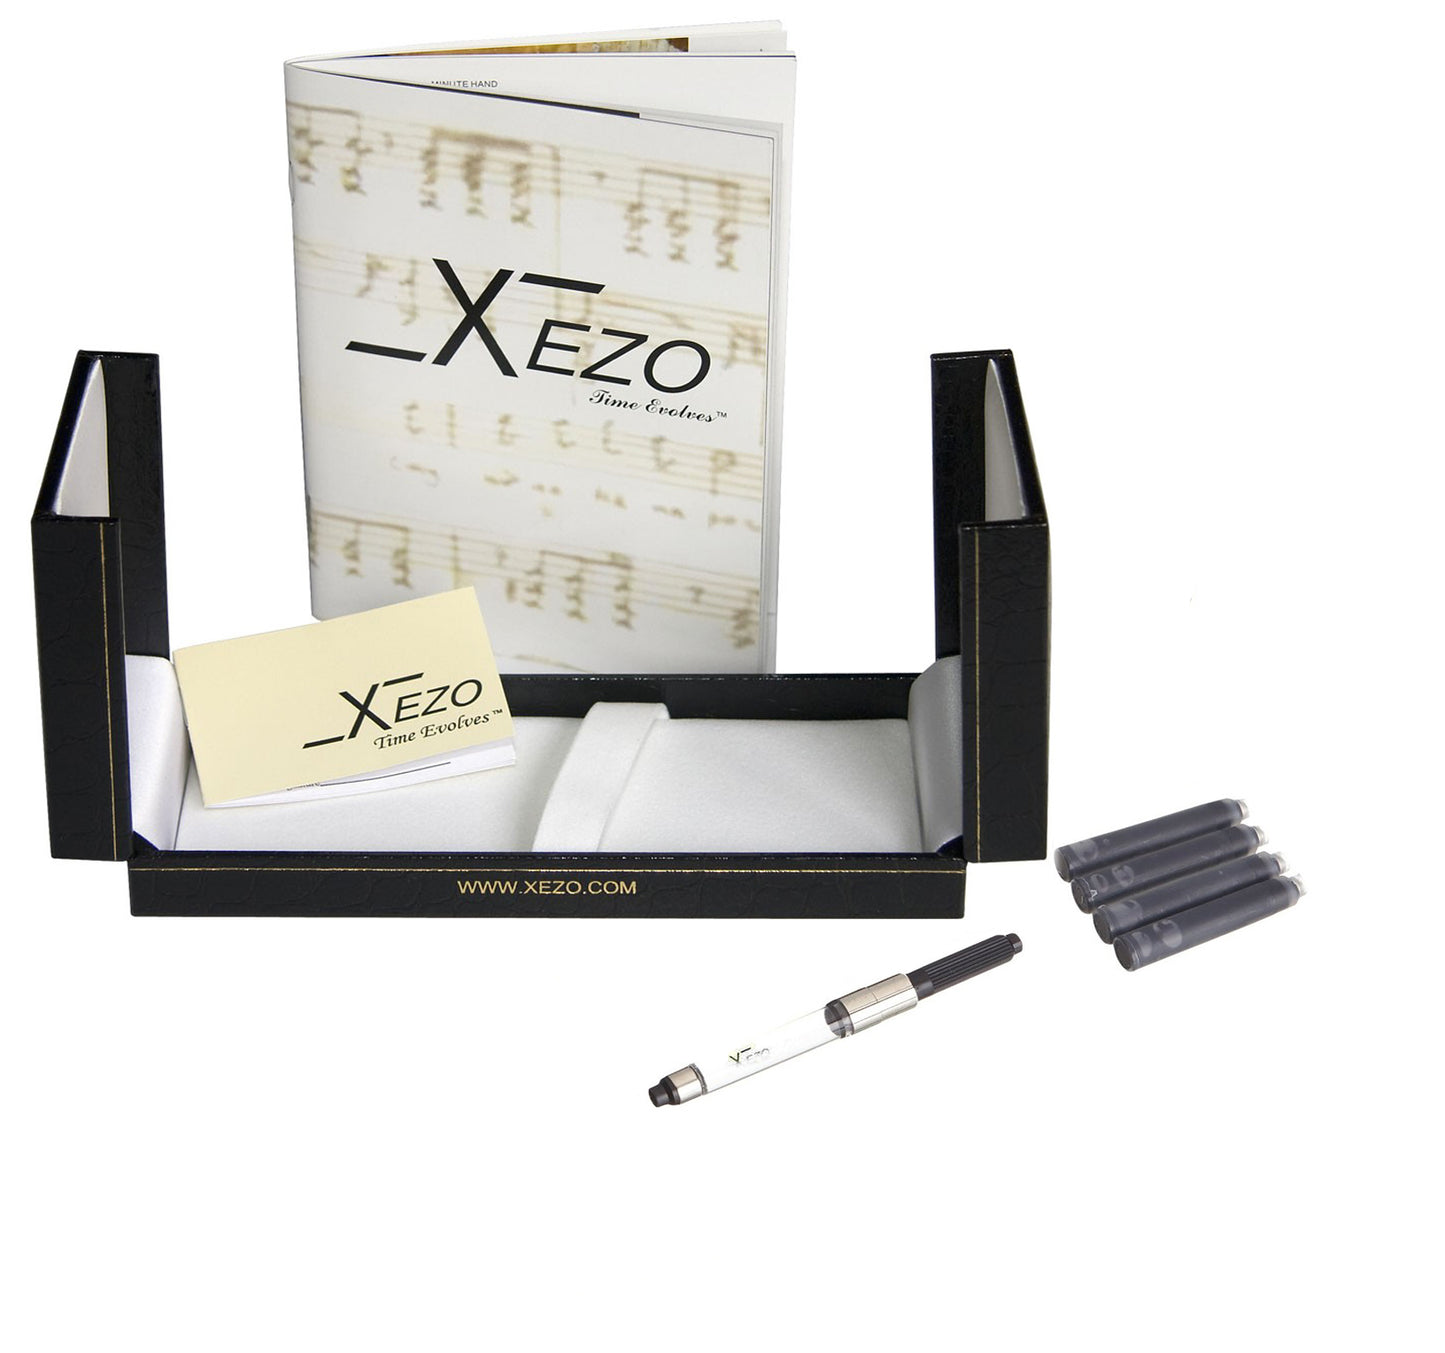 Xezo - Black gift box, certificate, manual, chrome-plated ink converter, and four ink cartridges of the Maestro Black MOP Tungsten F-2 fountain pens